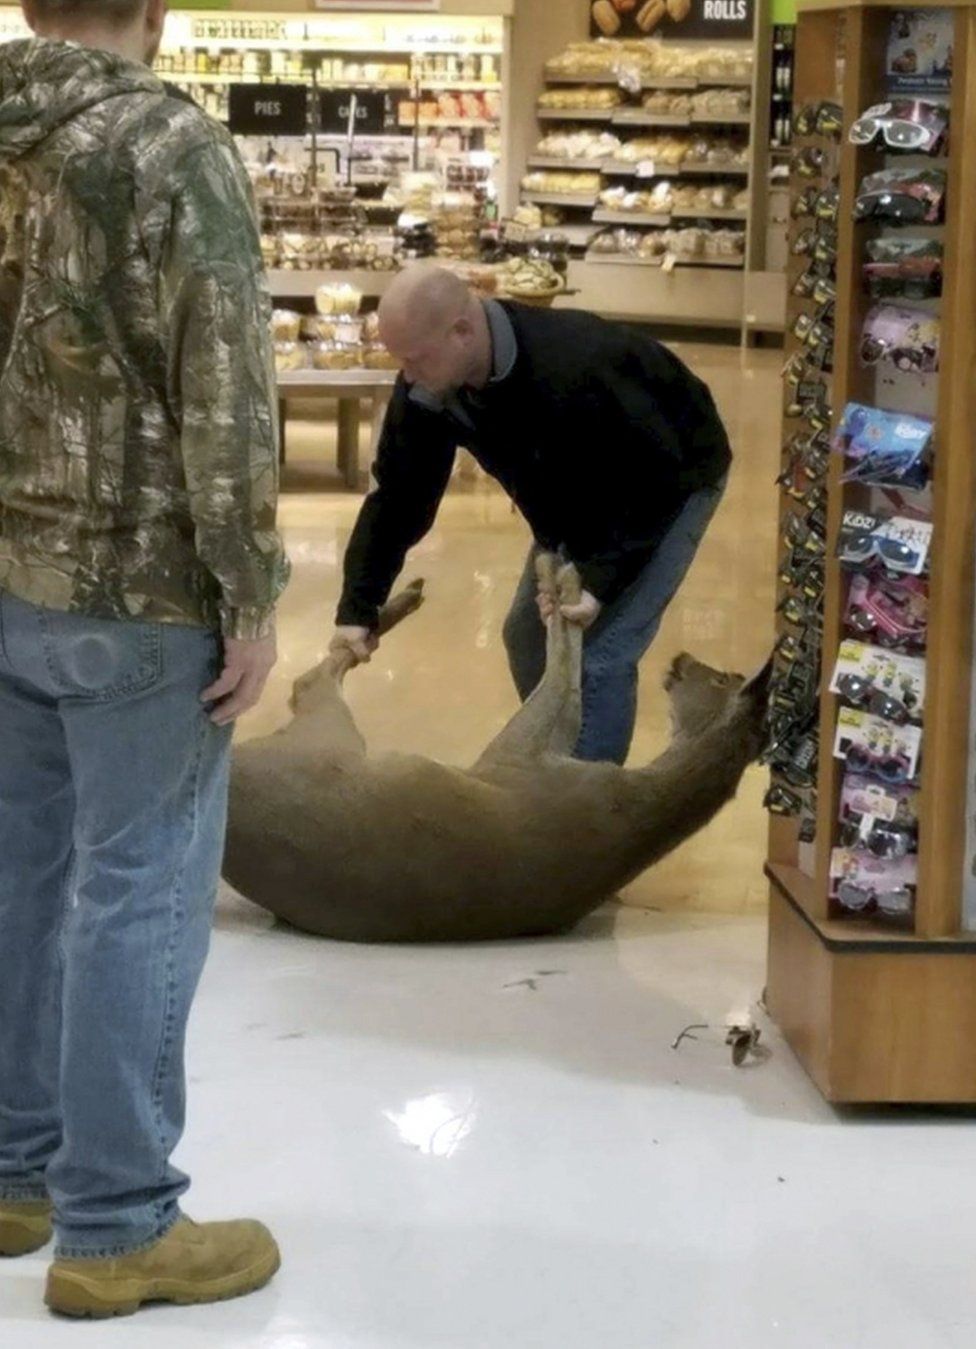 Other shoppers said the deer was caught within one minute of bursting into the grocery store